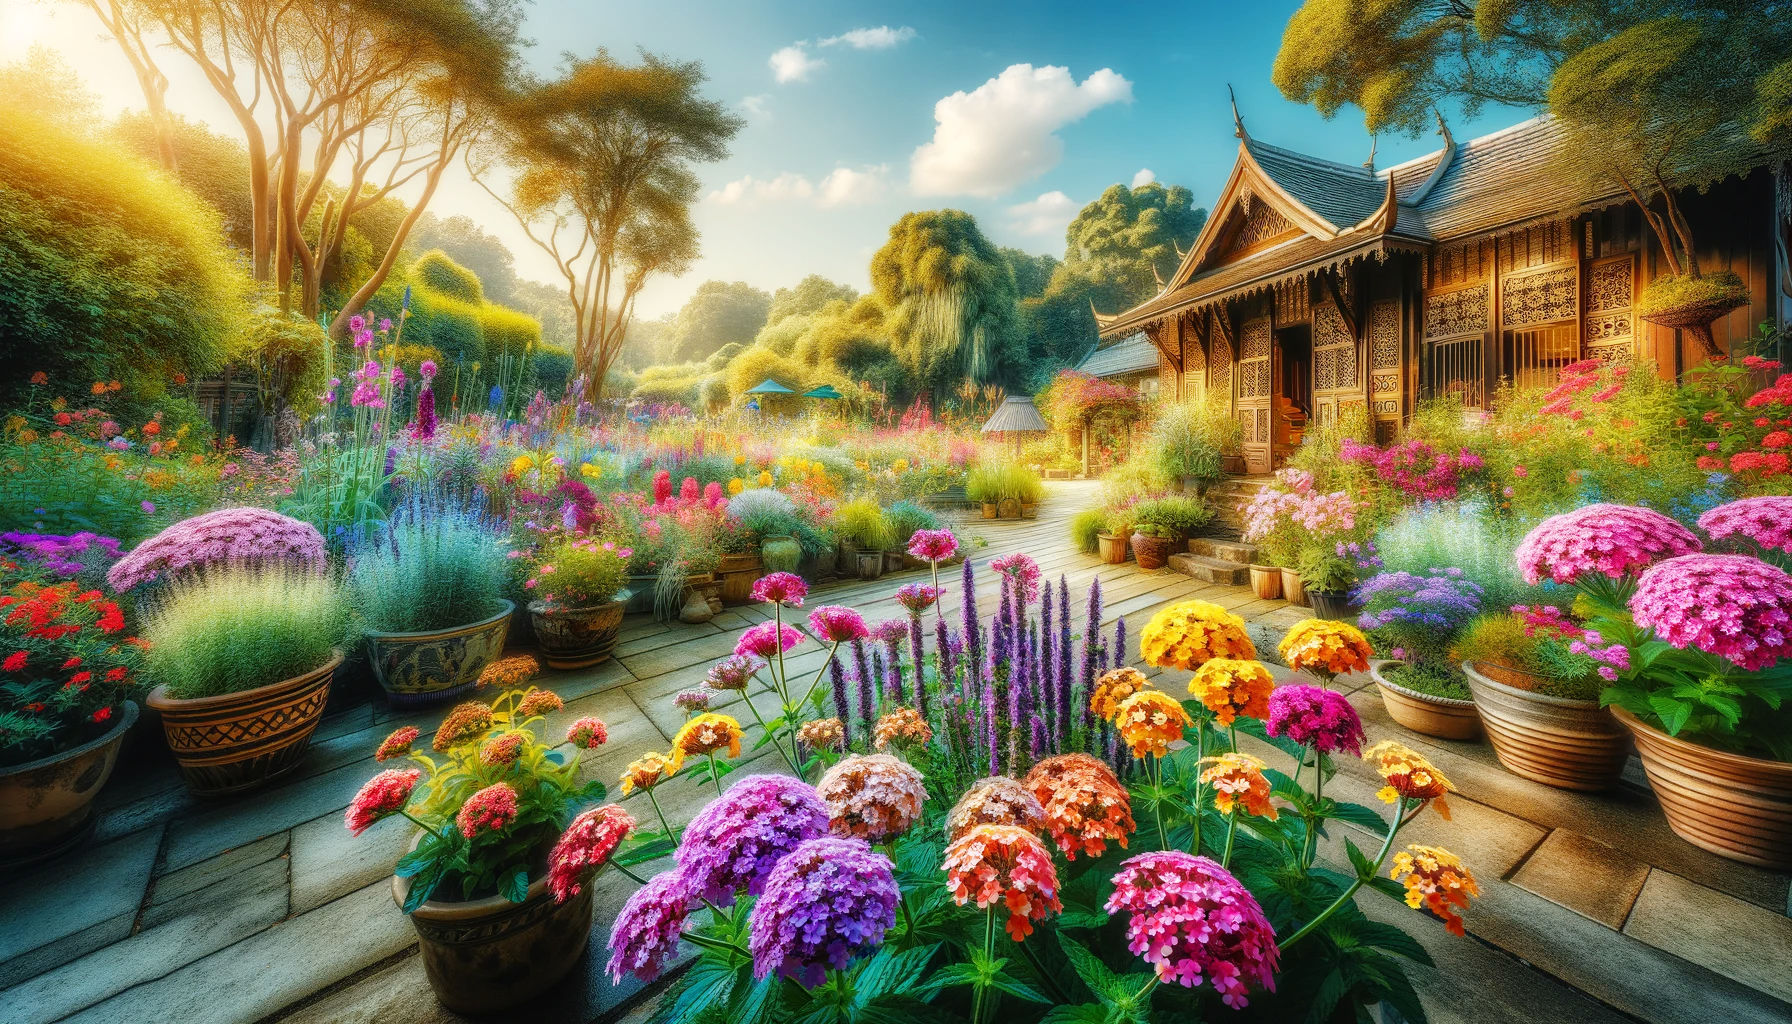 Here's an image that captures the vibrant and colorful essence of Verbena in a traditional garden setting. This scene reflects the global journey of Verbena, with its rich blooms and inviting garden atmosphere. The focus on Verbena plants amidst a variety of flowers and greenery under a clear blue sky visually conveys its historical significance and widespread appeal.